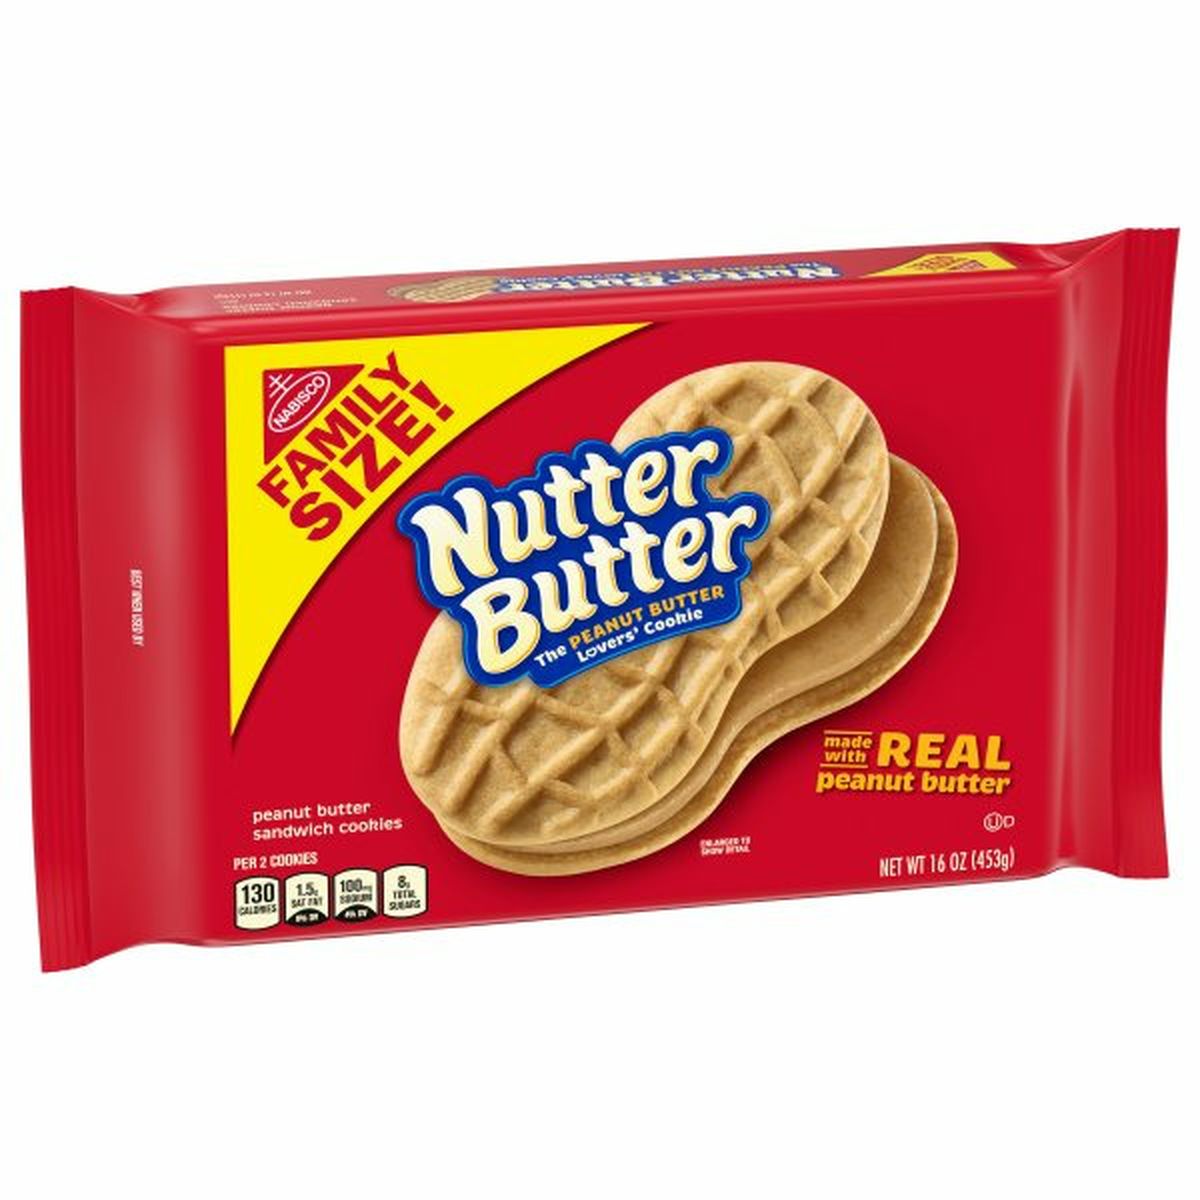 Calories in Nutter Butter Sandwich Cookies, Peanut Butter, Family Size